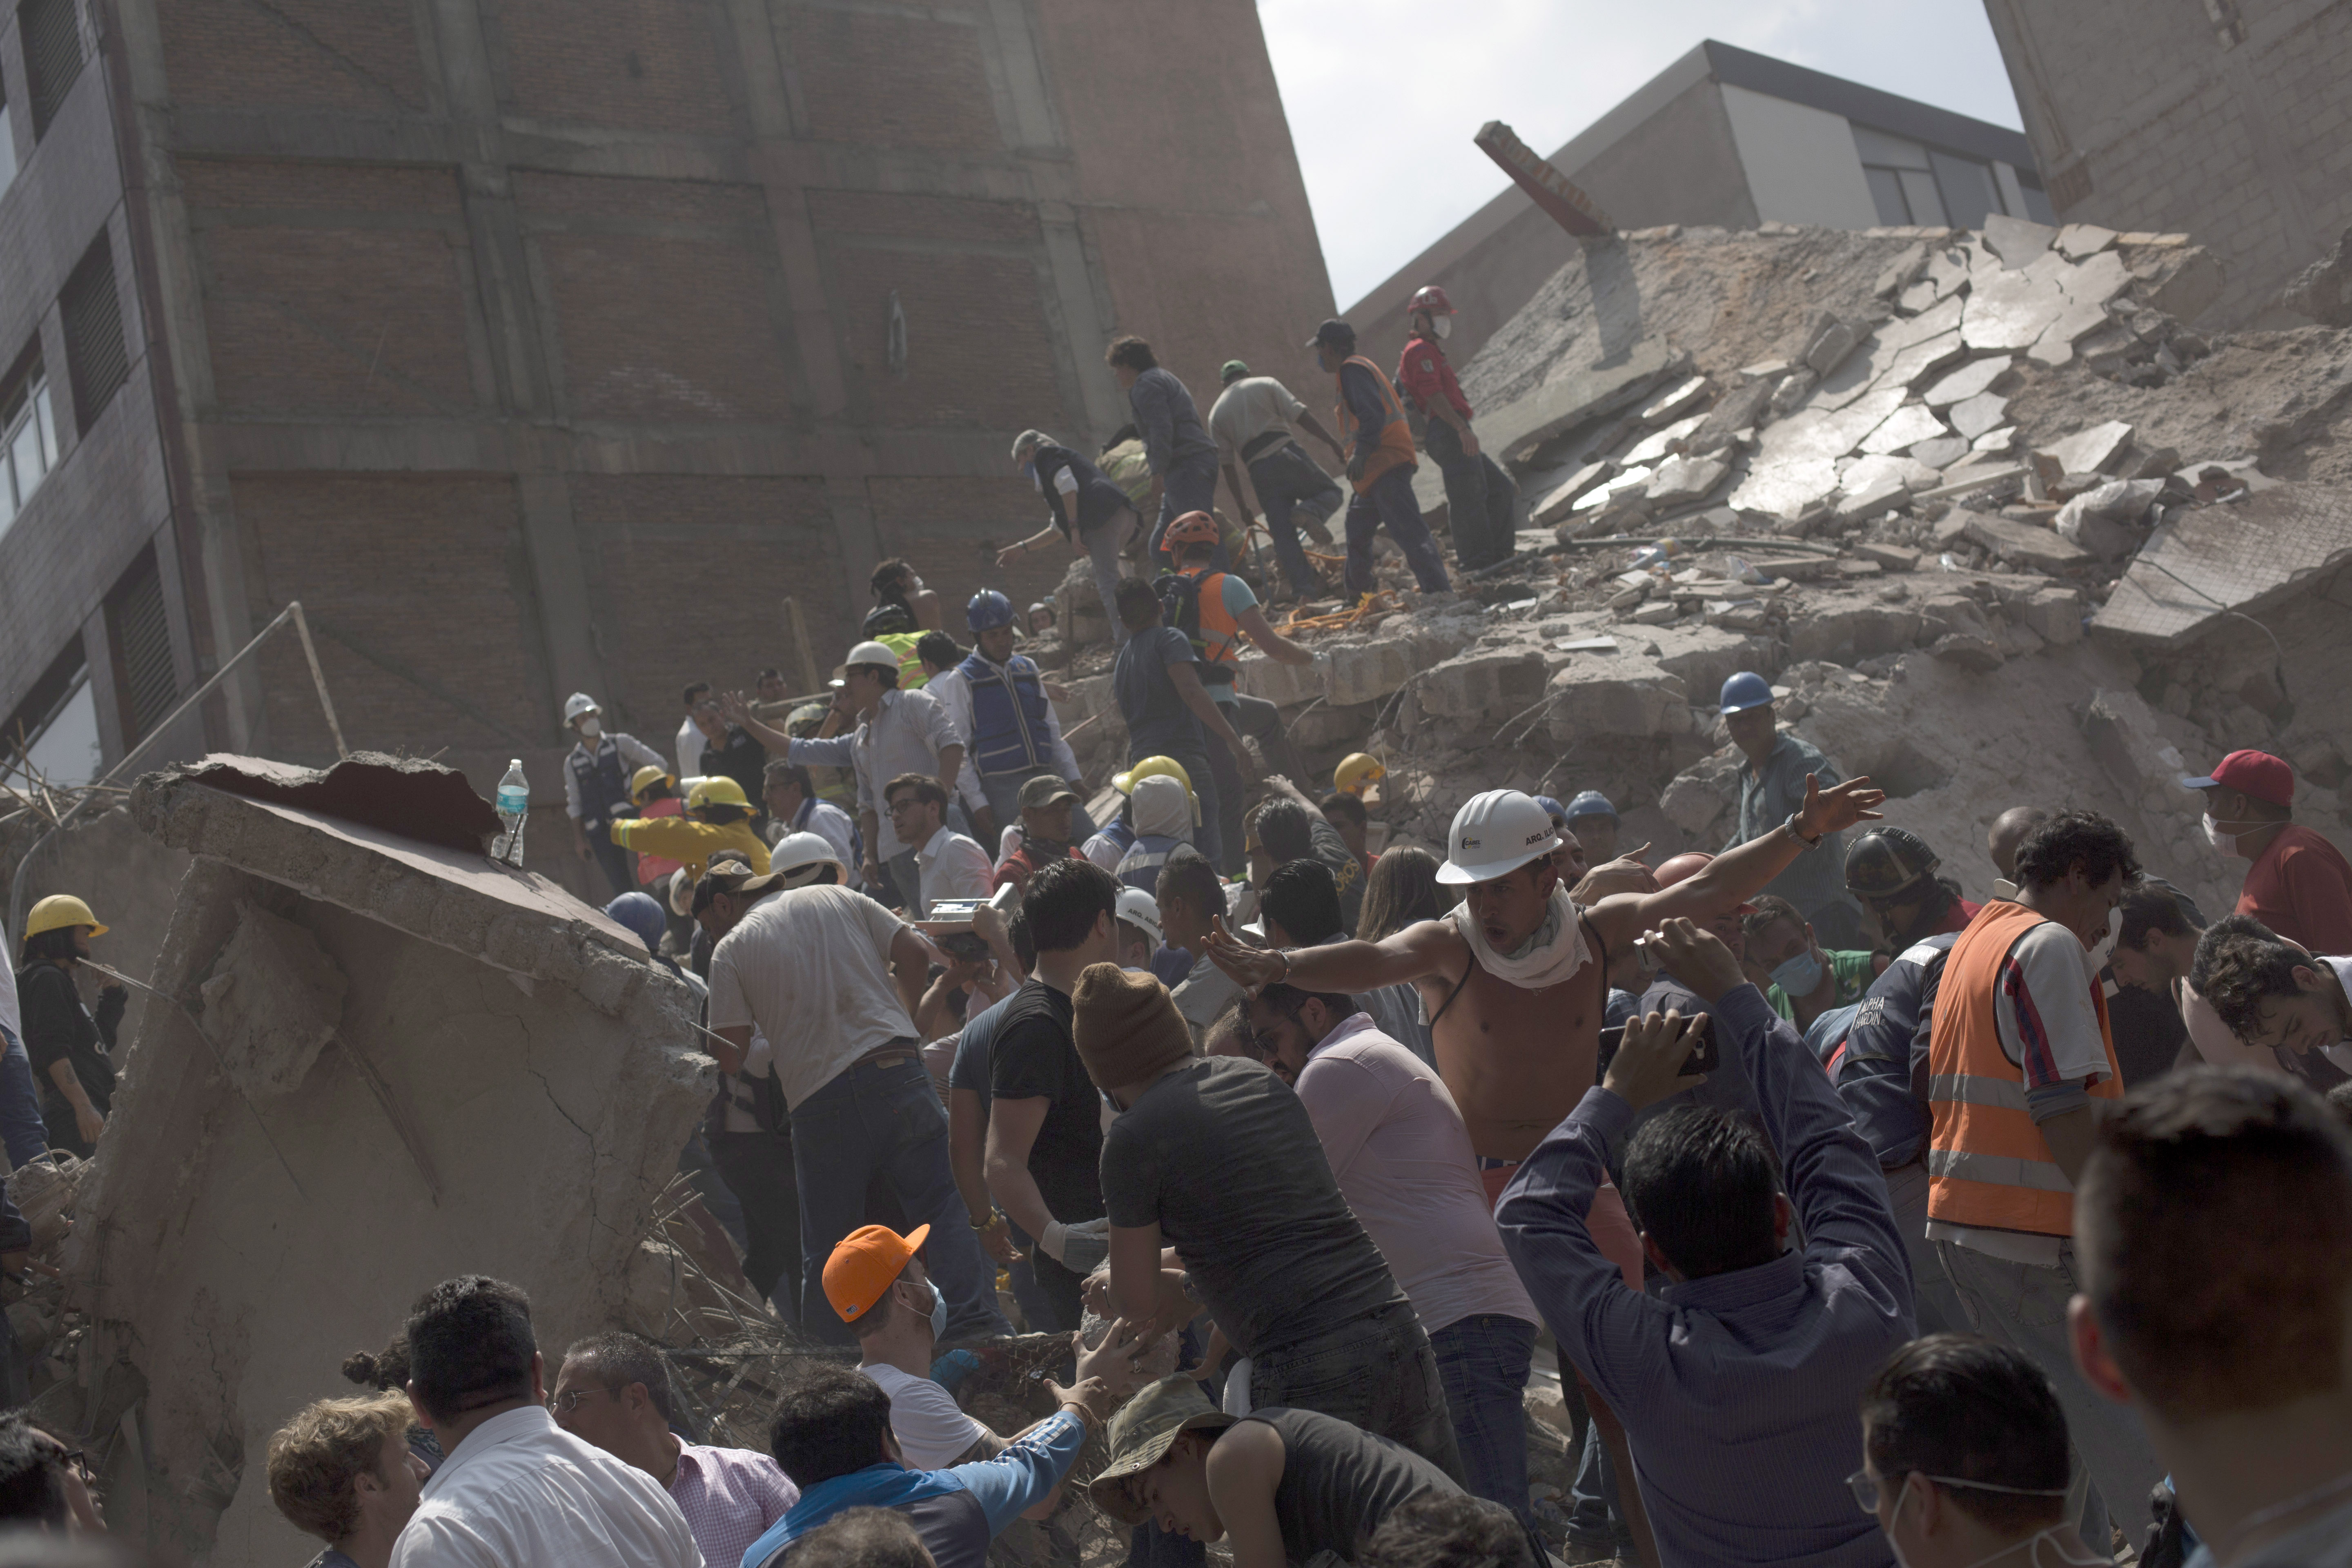 MEXICO CITY, MEXICO - SEPTEMBER 19: Rescuers work in the rubble after a magnitude 7.1 earthquake struck on September 19, 2017 in Mexico City, Mexico. The earthquake caused multiple fatalities, destroyed buildings and knocked out power throughout the capital. (Photo by Rafael S. Fabres/Getty Images)